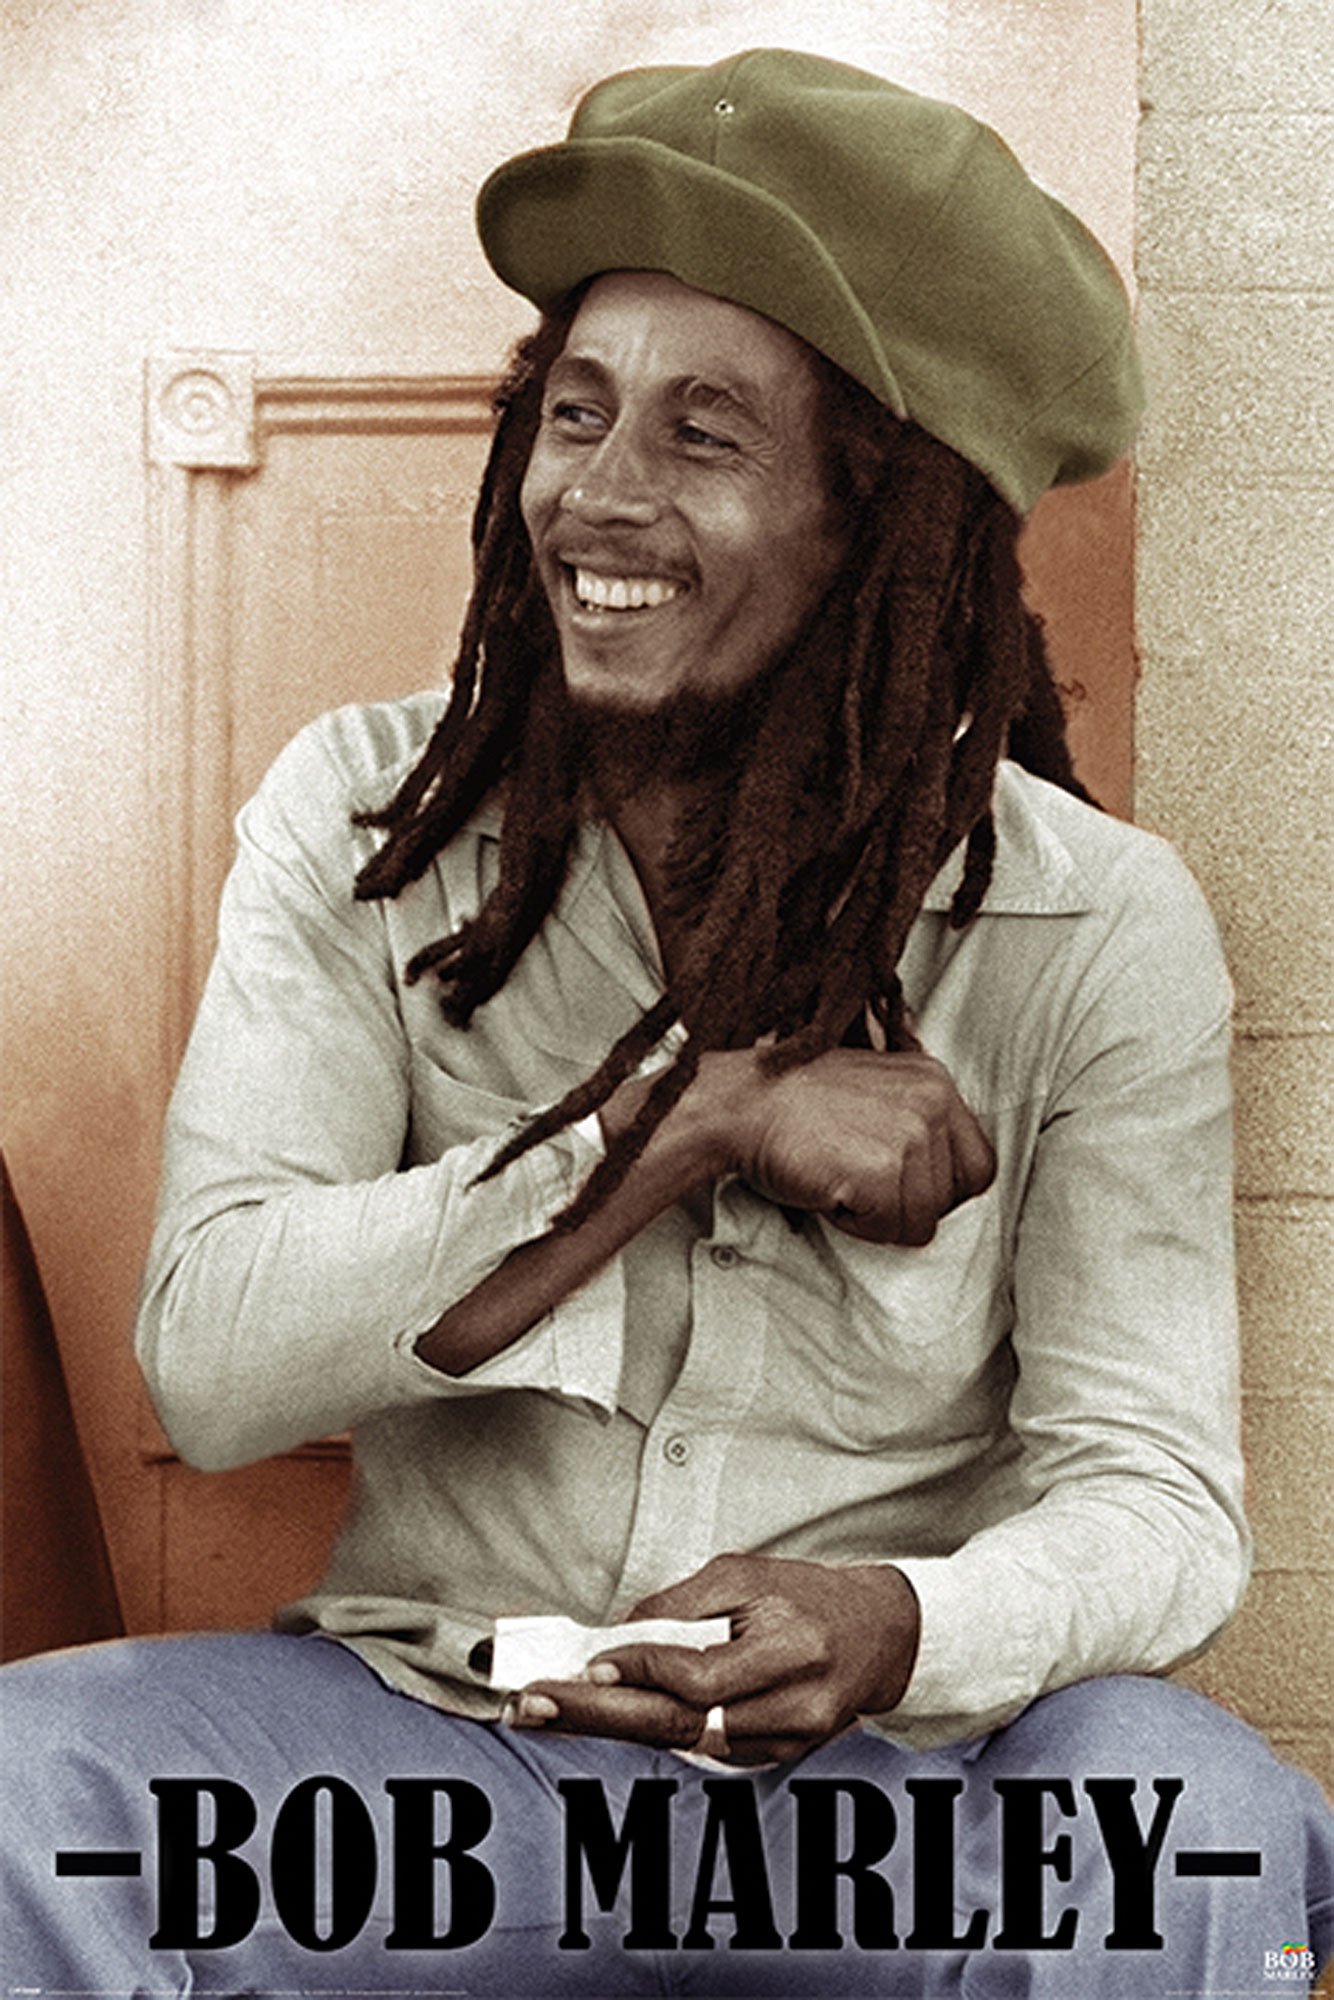 Rolling Papers - Bob Marley,